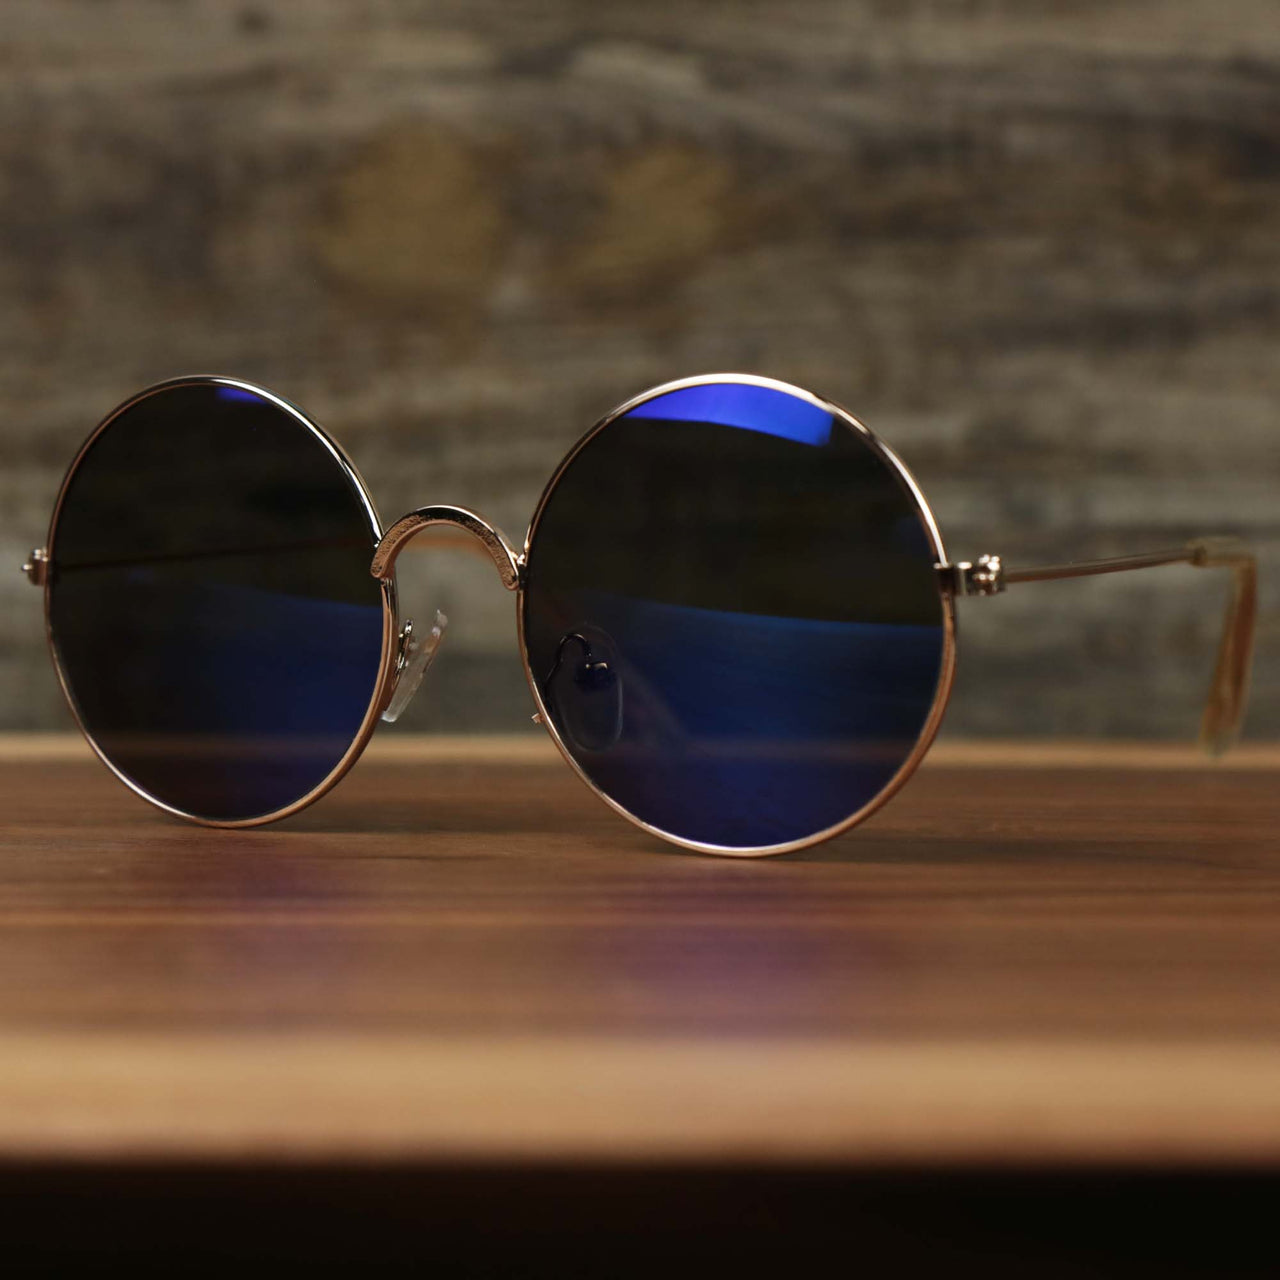 The Youth Round Frame Blue Lens Sunglasses with Rose Gold Frame